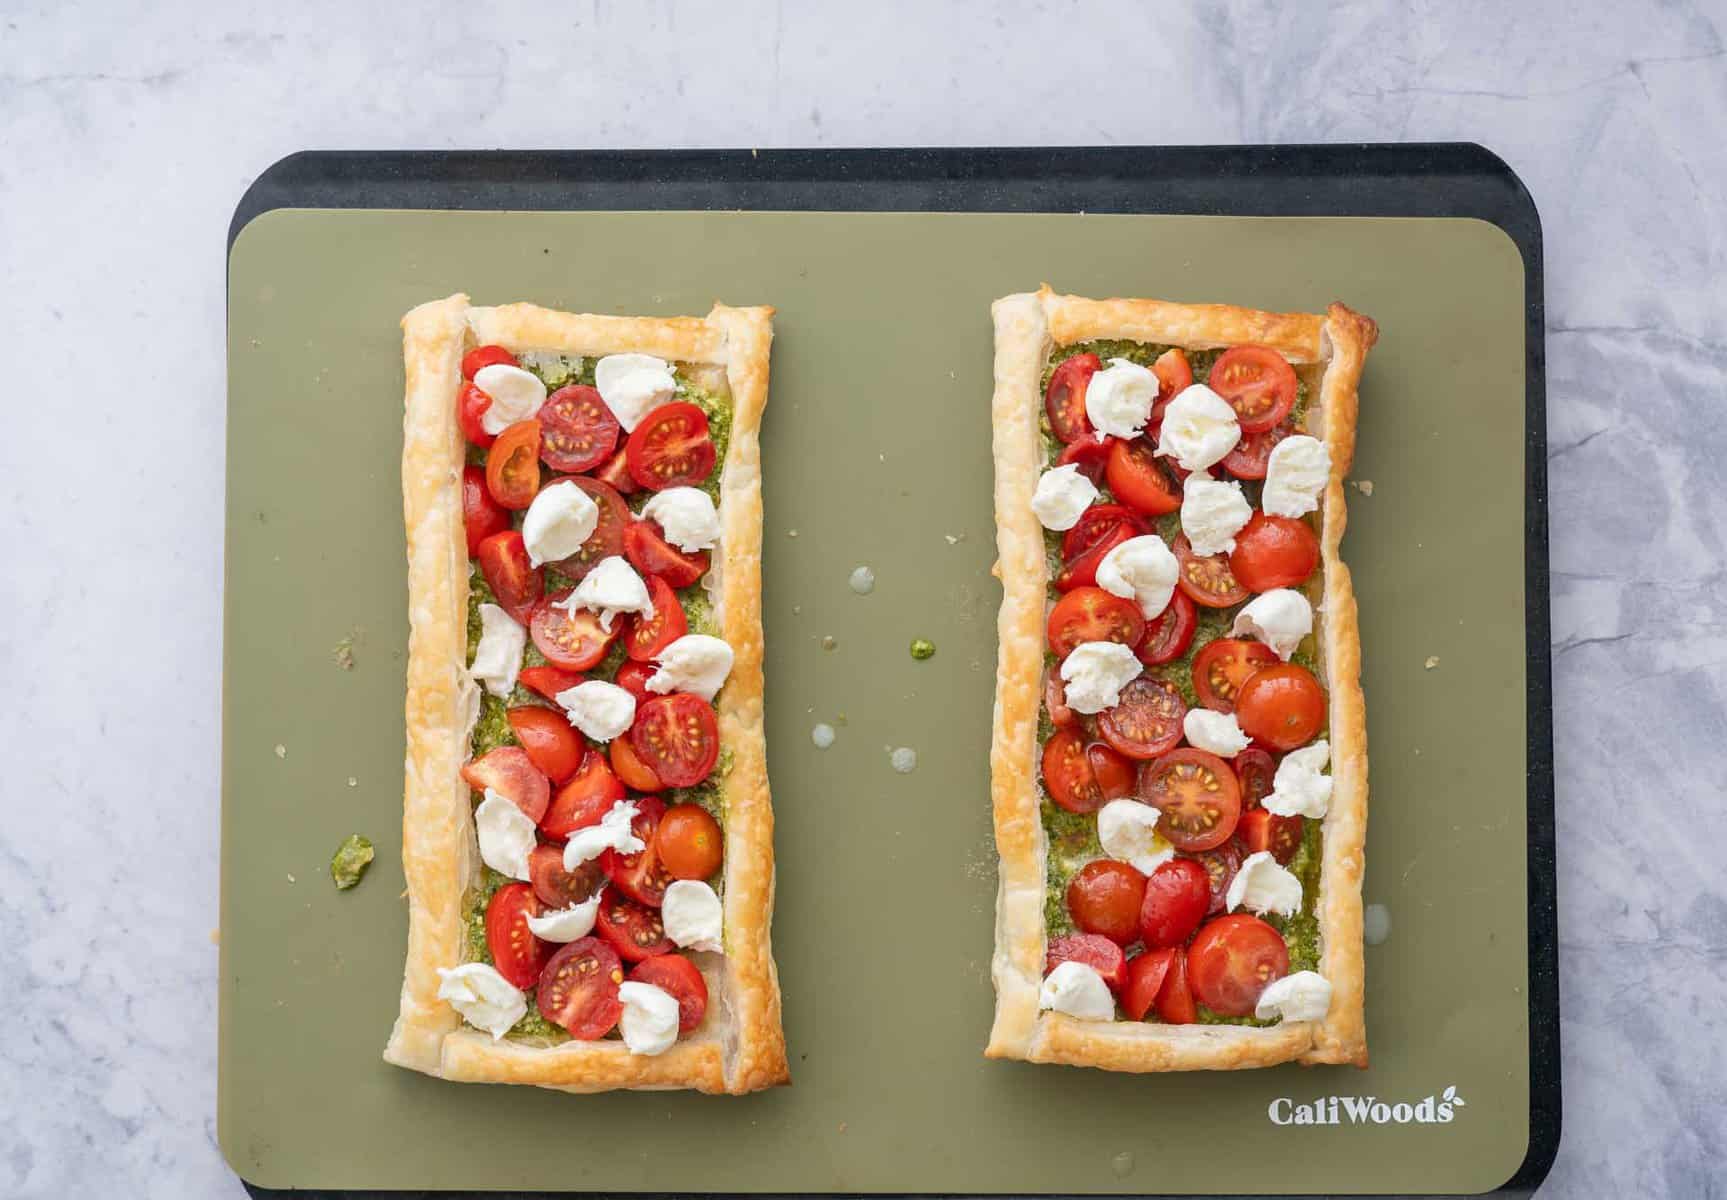 Two baked tarts on a baking tray with pesto spread across each of them a layered with sliced tomatoes and cheese.